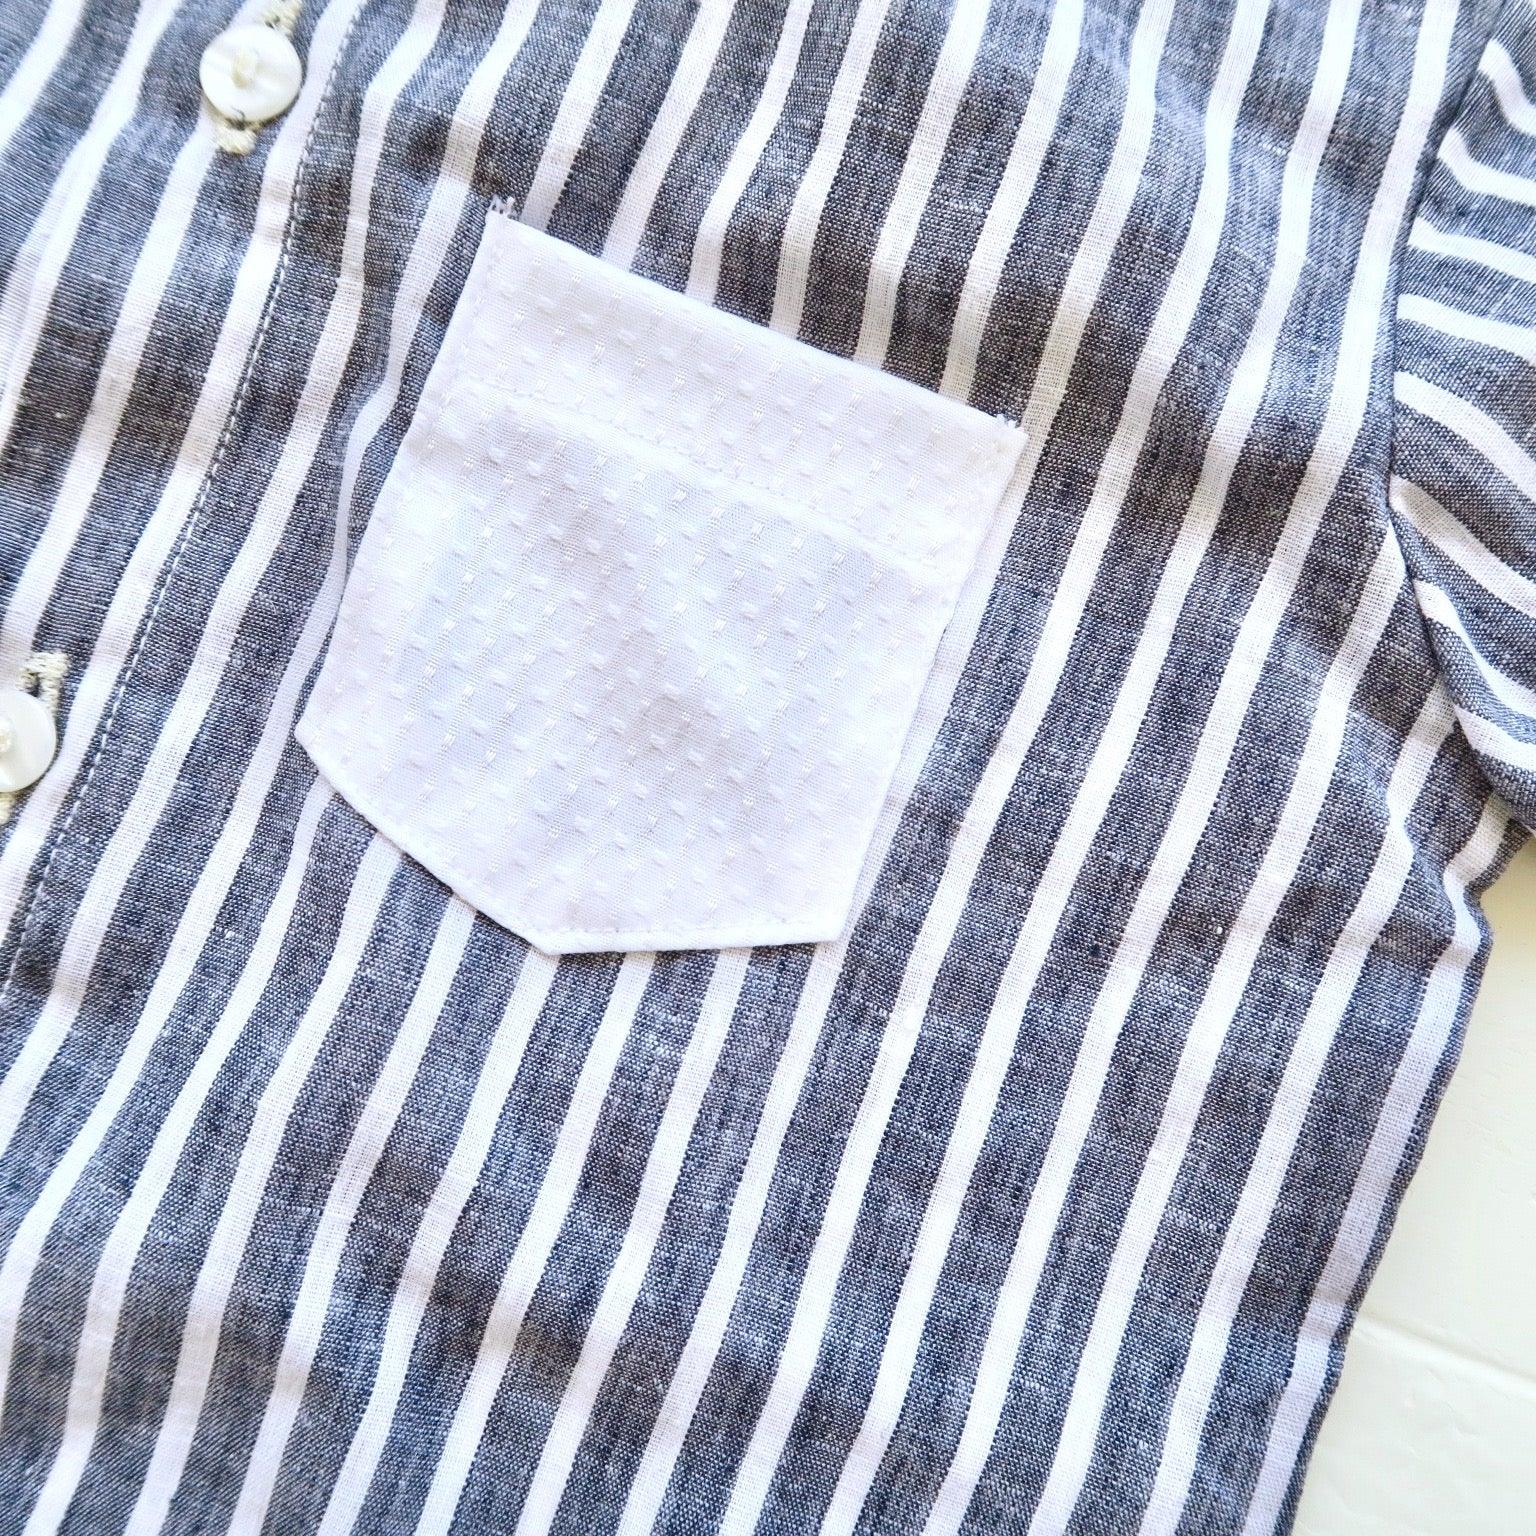 Cedar Top & Shorts in Stripes Linen and White Squares - Lil' Tati